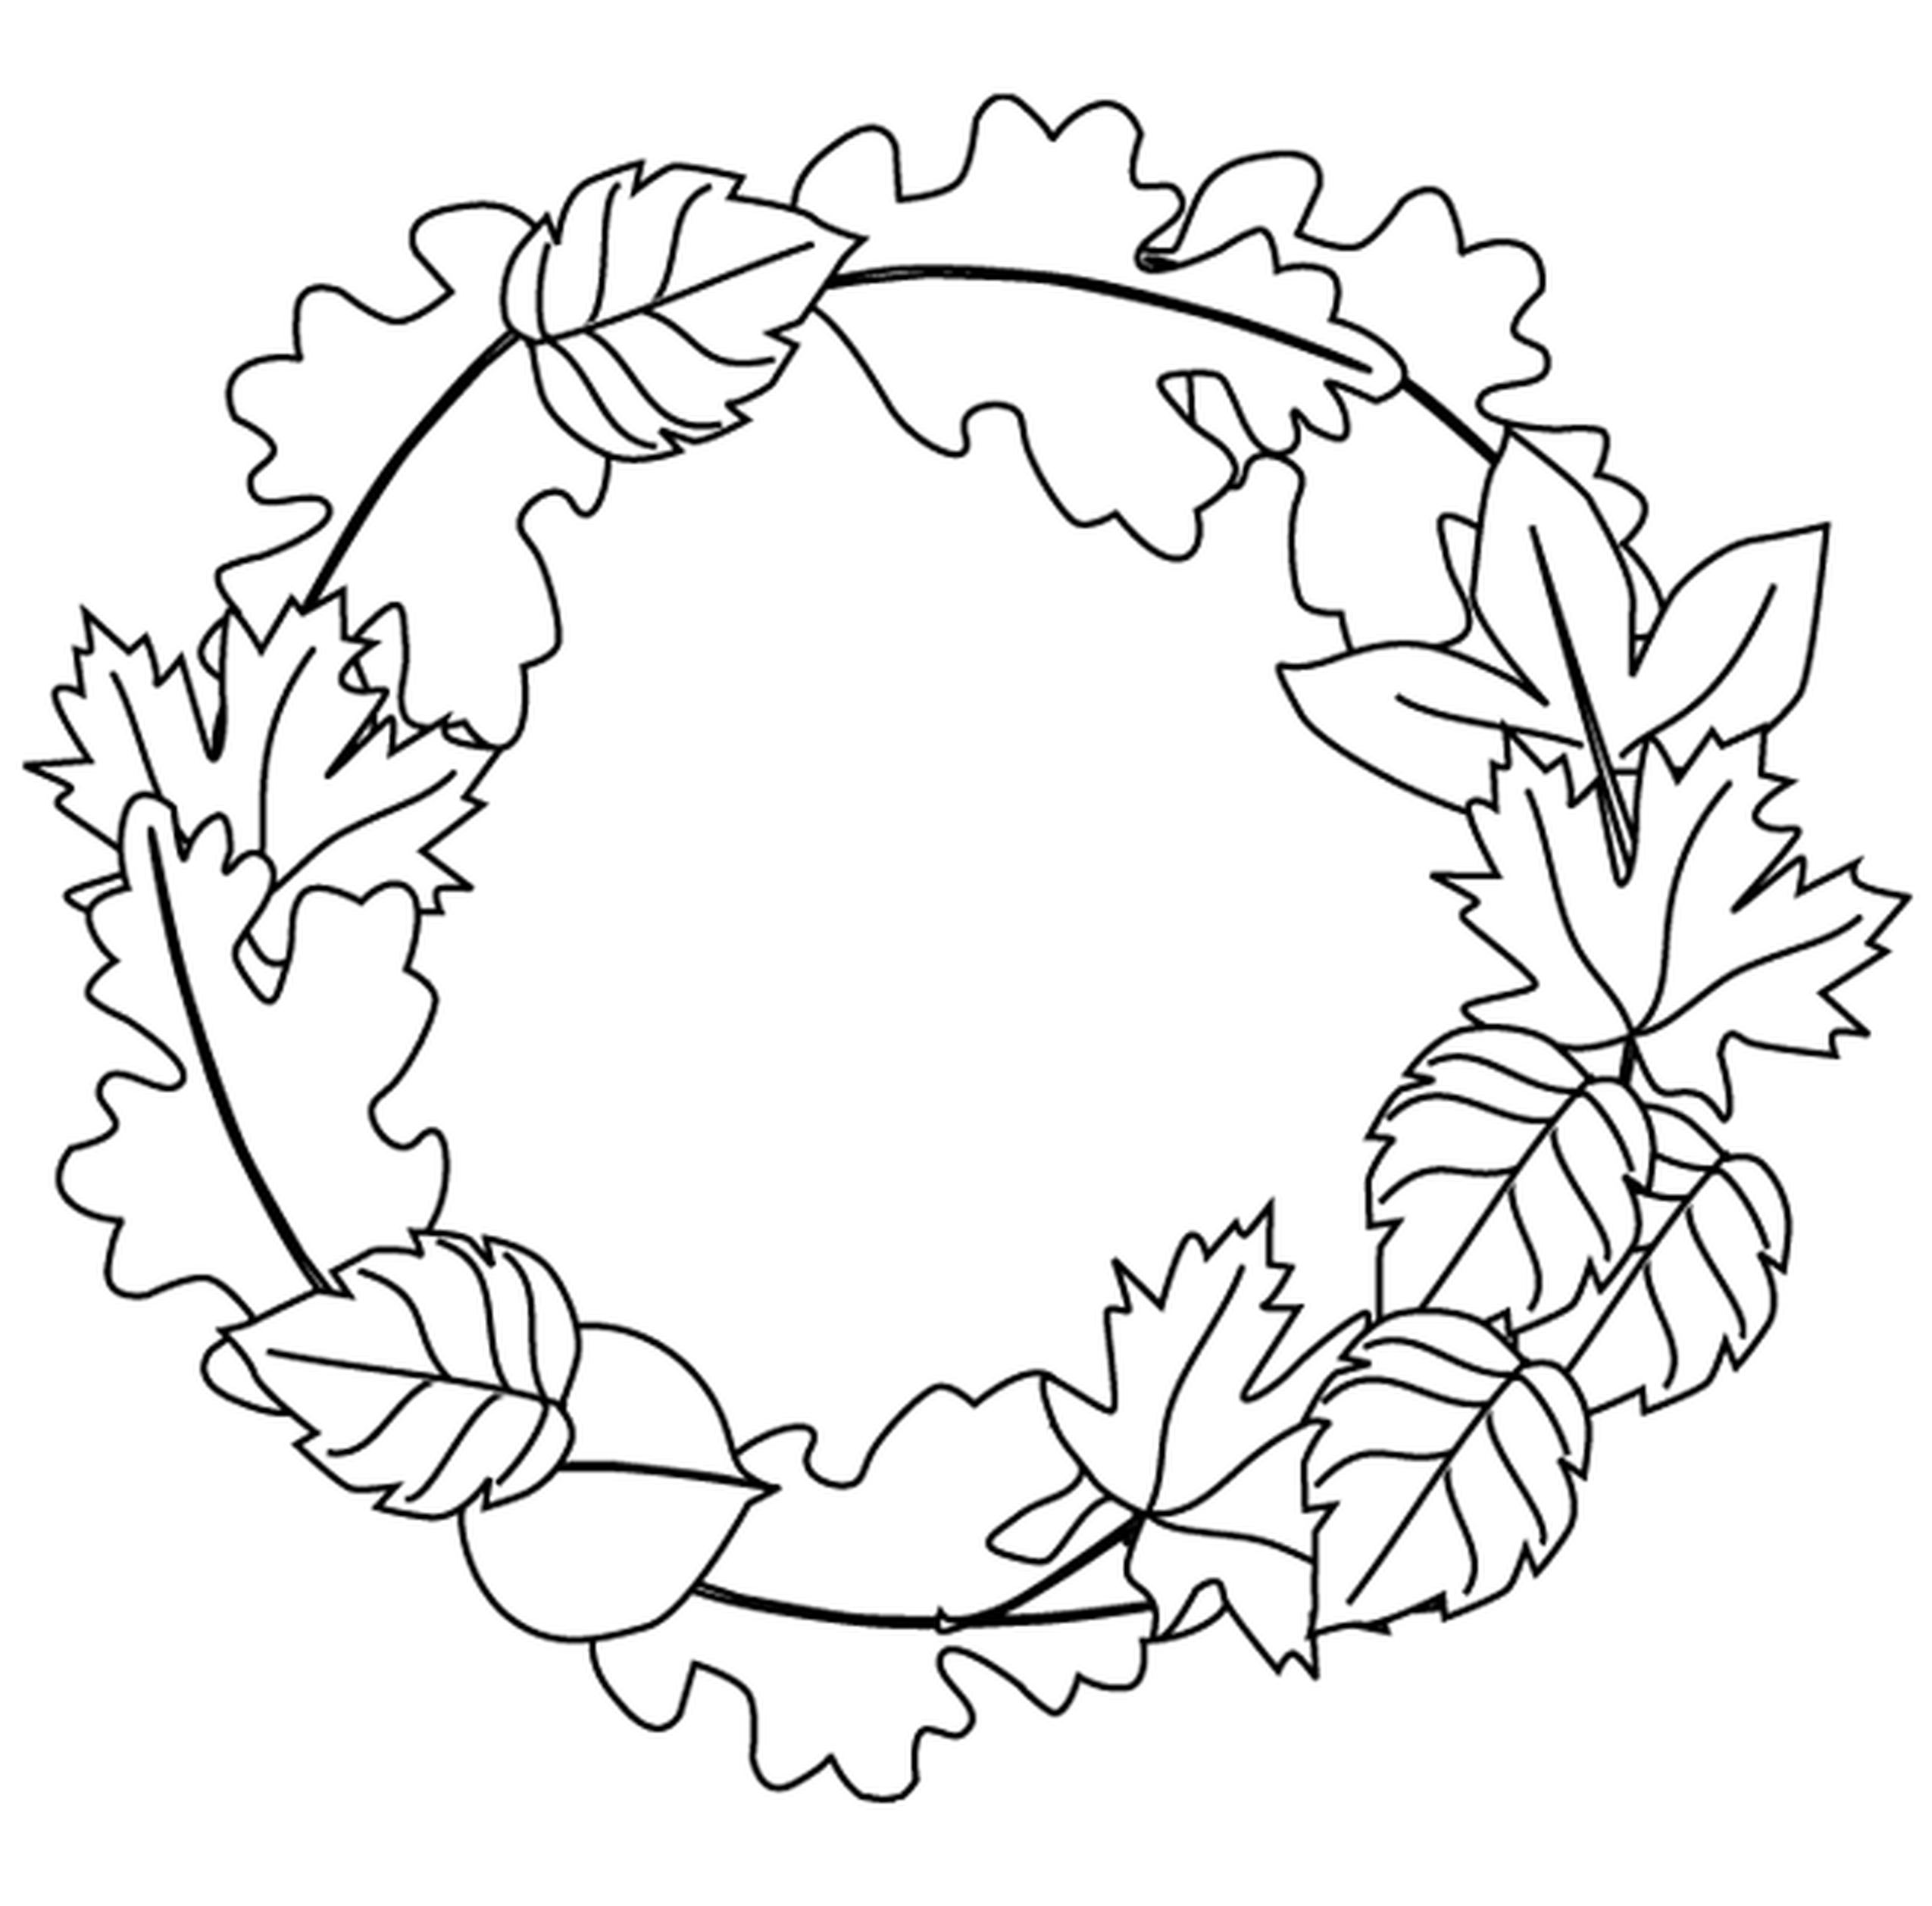 coloring-pages-and-fall